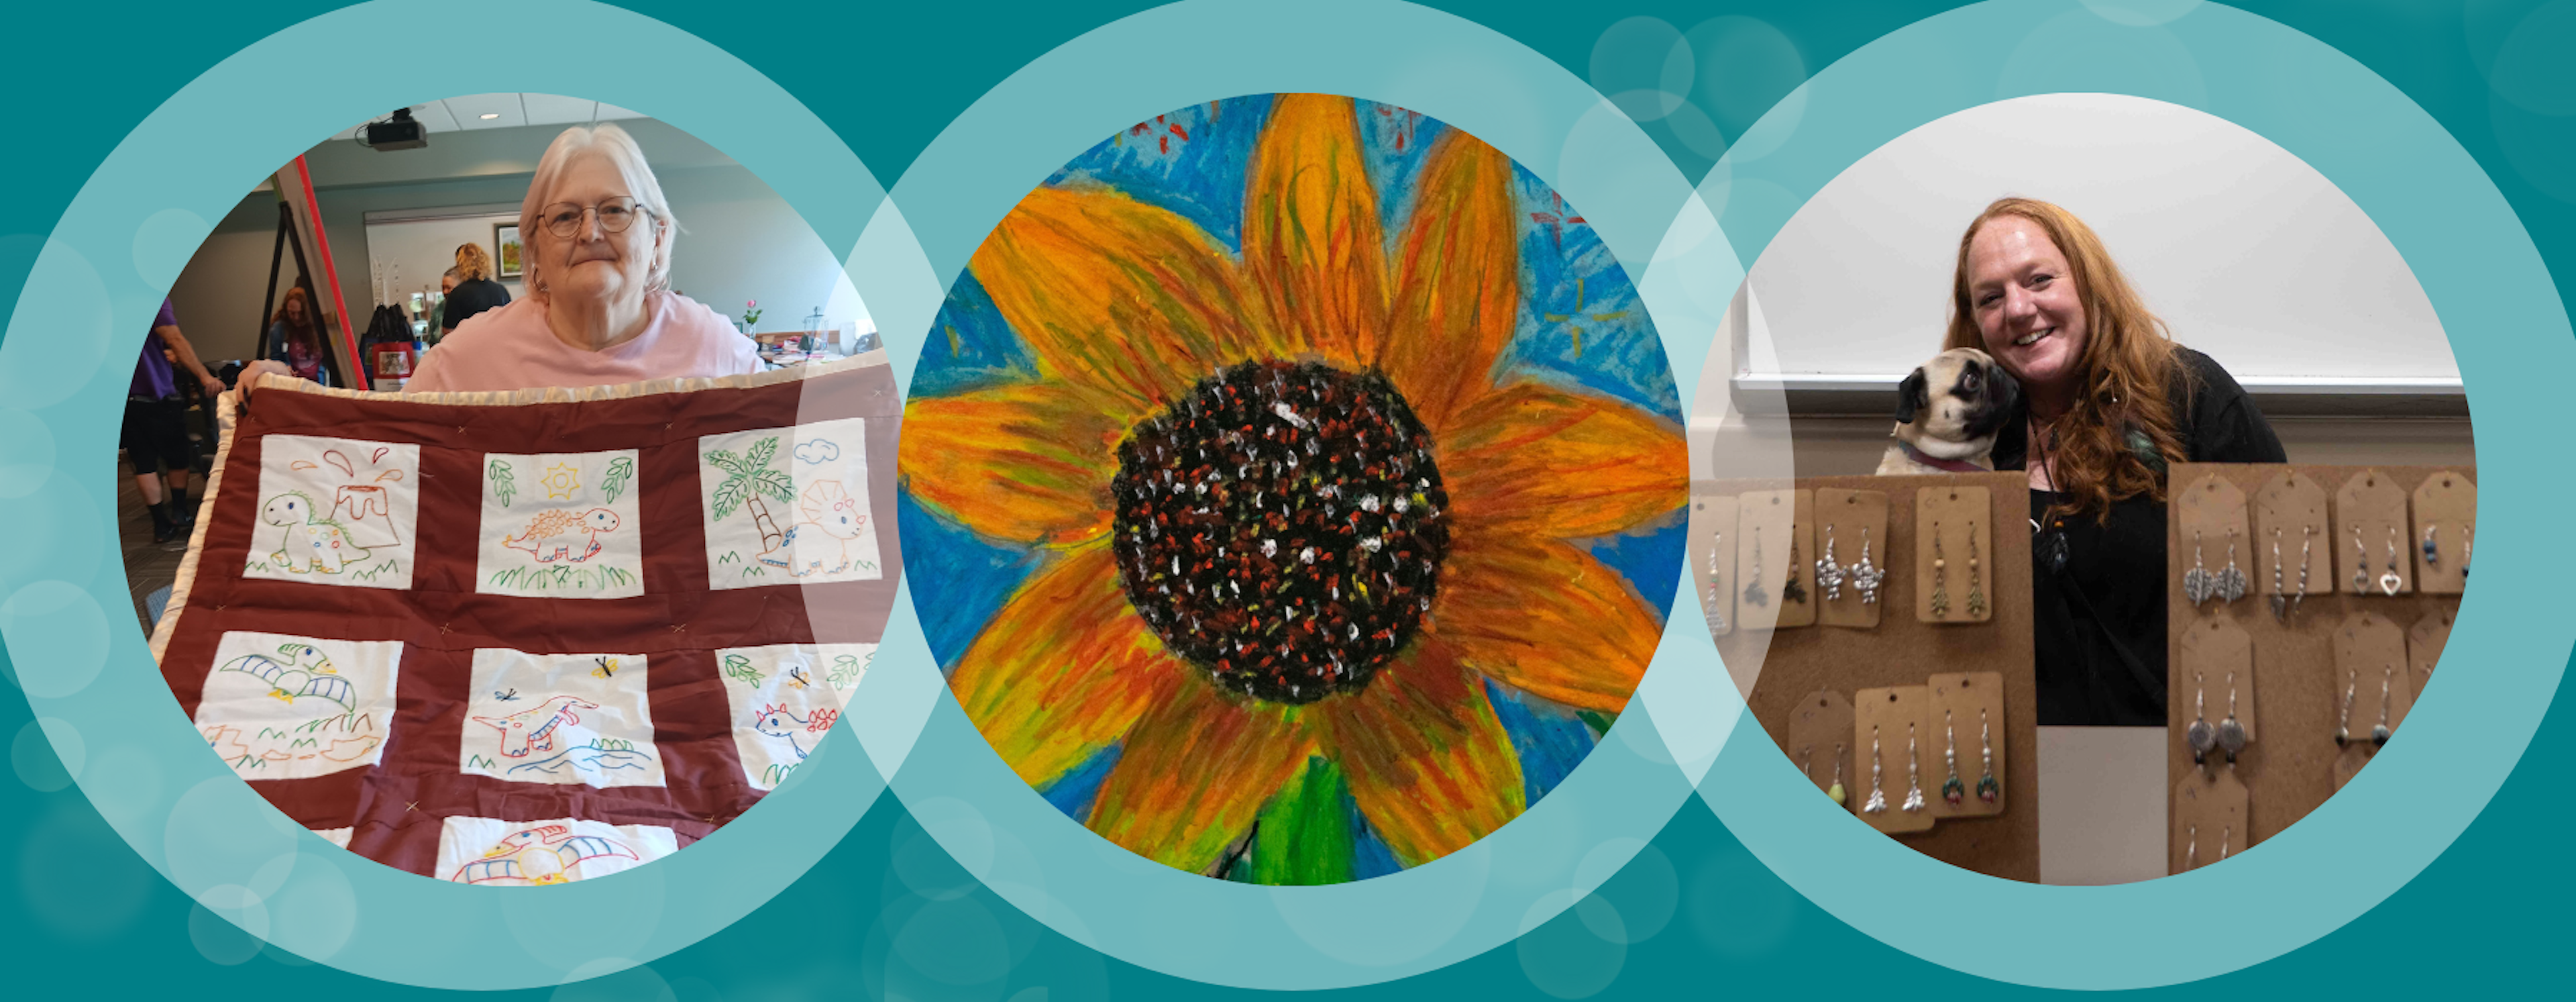 Three circles. One with a woman and quilt, another with a painted sunflower a third with handmade jewelry.